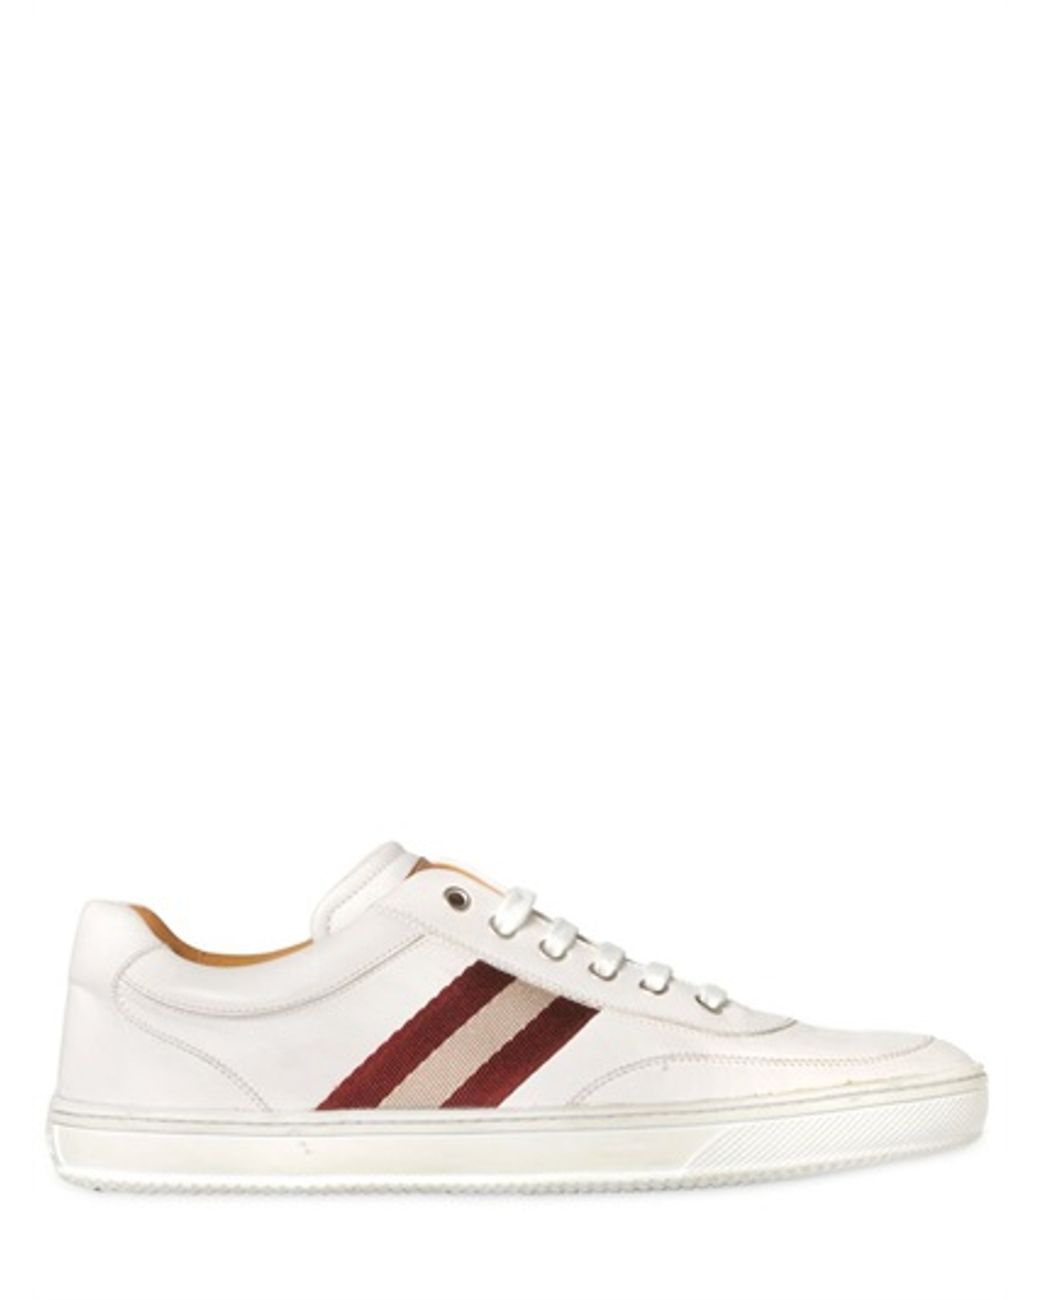 Bally Oriano Leather Sneakers in White for Men | Lyst